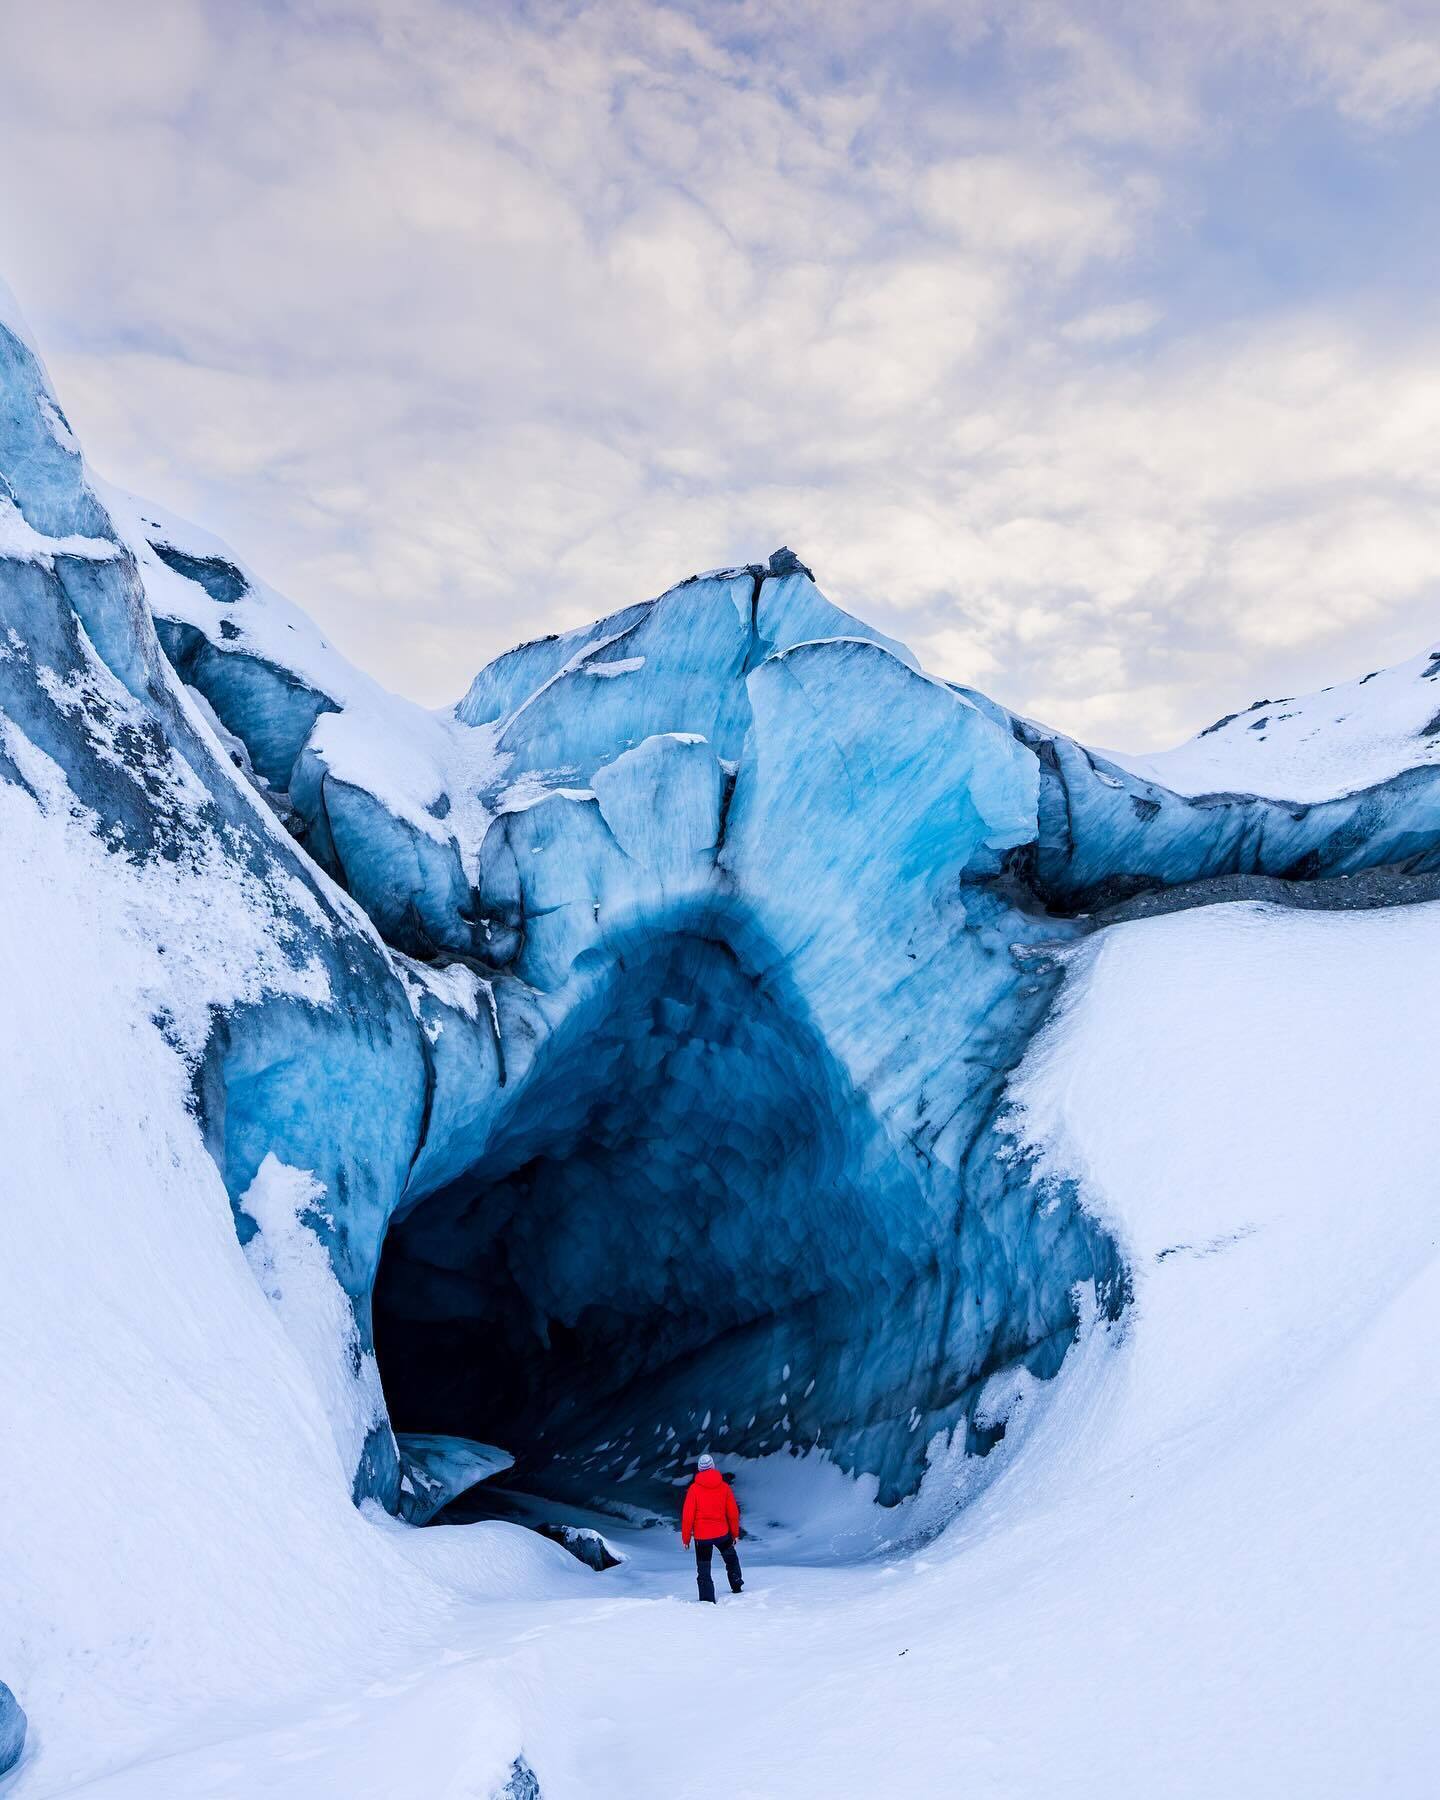 Ice caves or northern lights: the best options for a magical winter vacation